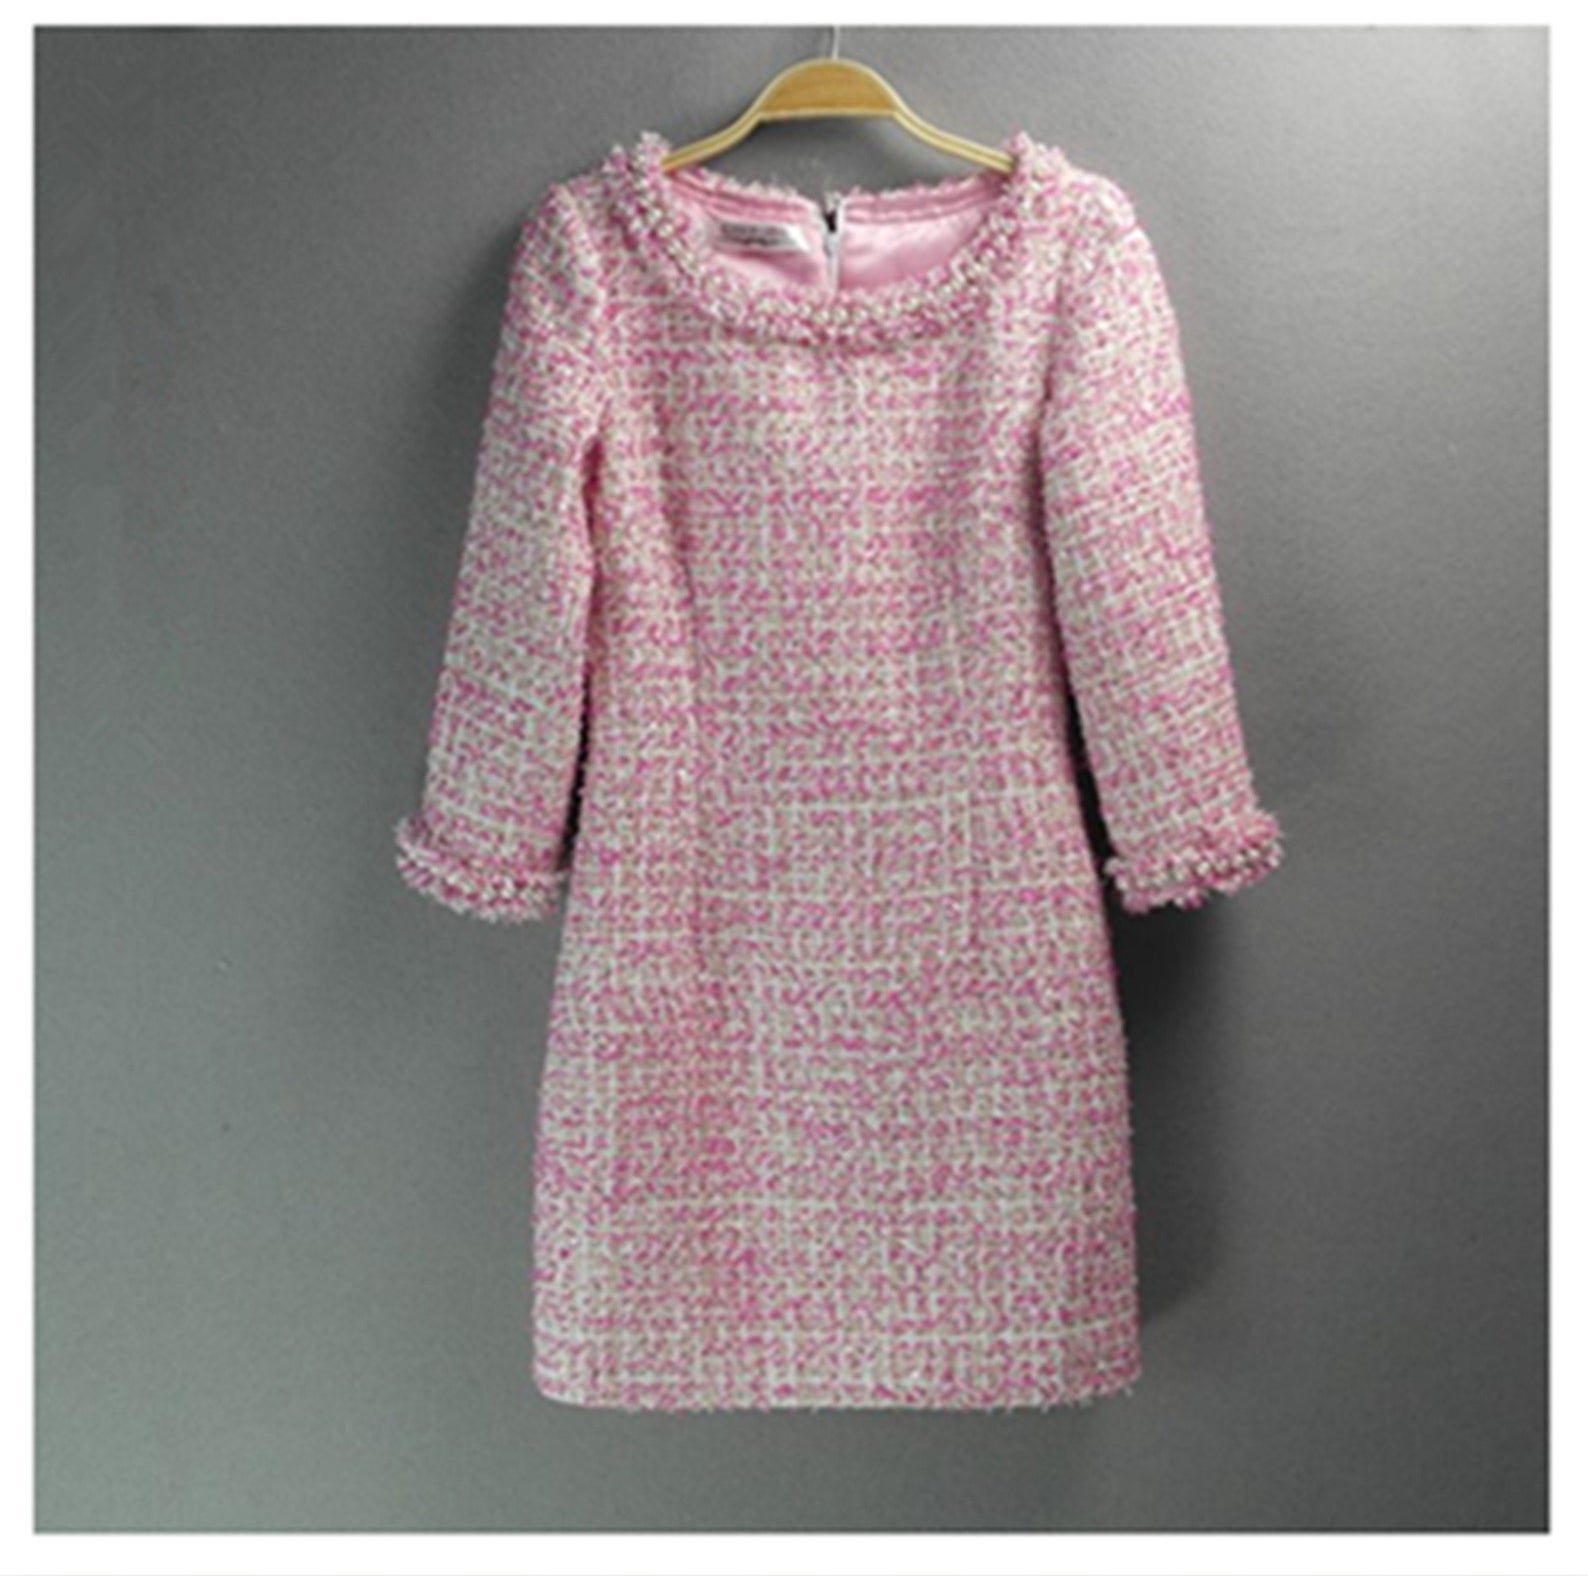 Sheath Pearls Tweed 3/4 Sleeves Dress Hot Pink  UK CUSTOMER SERVICE! Sheath Pearls Tweed 3/4 Sleeves Dress Hot Pink - Pink tweed fabric with back zip, 3/4 sleeves, Knee length dress. Can wear it for outside party , holidays and casual or formal wear. Dry Cleaning. The midi length and round-neck gives this pencil fashionable dress a classic and timeless shape, making the baggy trendy pretty dressing gown versatile for various special occasions.